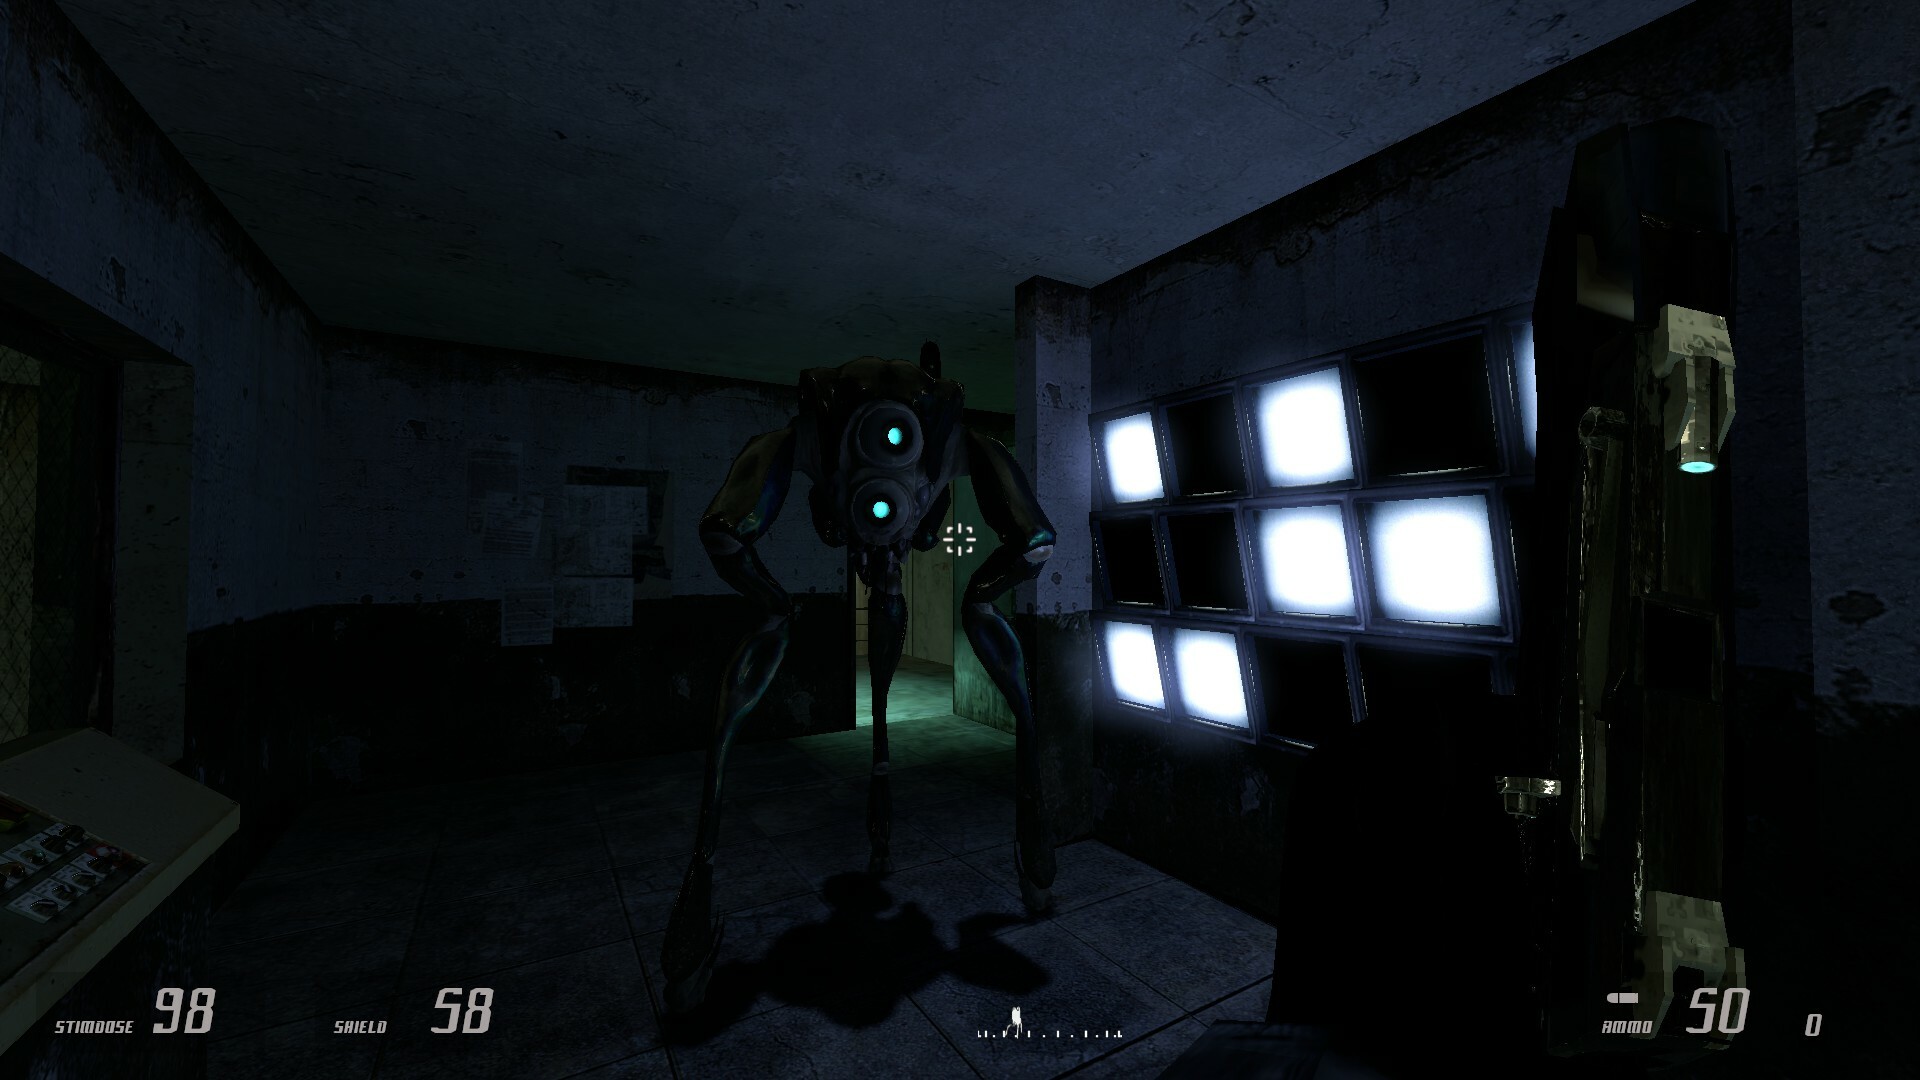 SCP Containment breach breaking bad texture pack mod - Mod DB